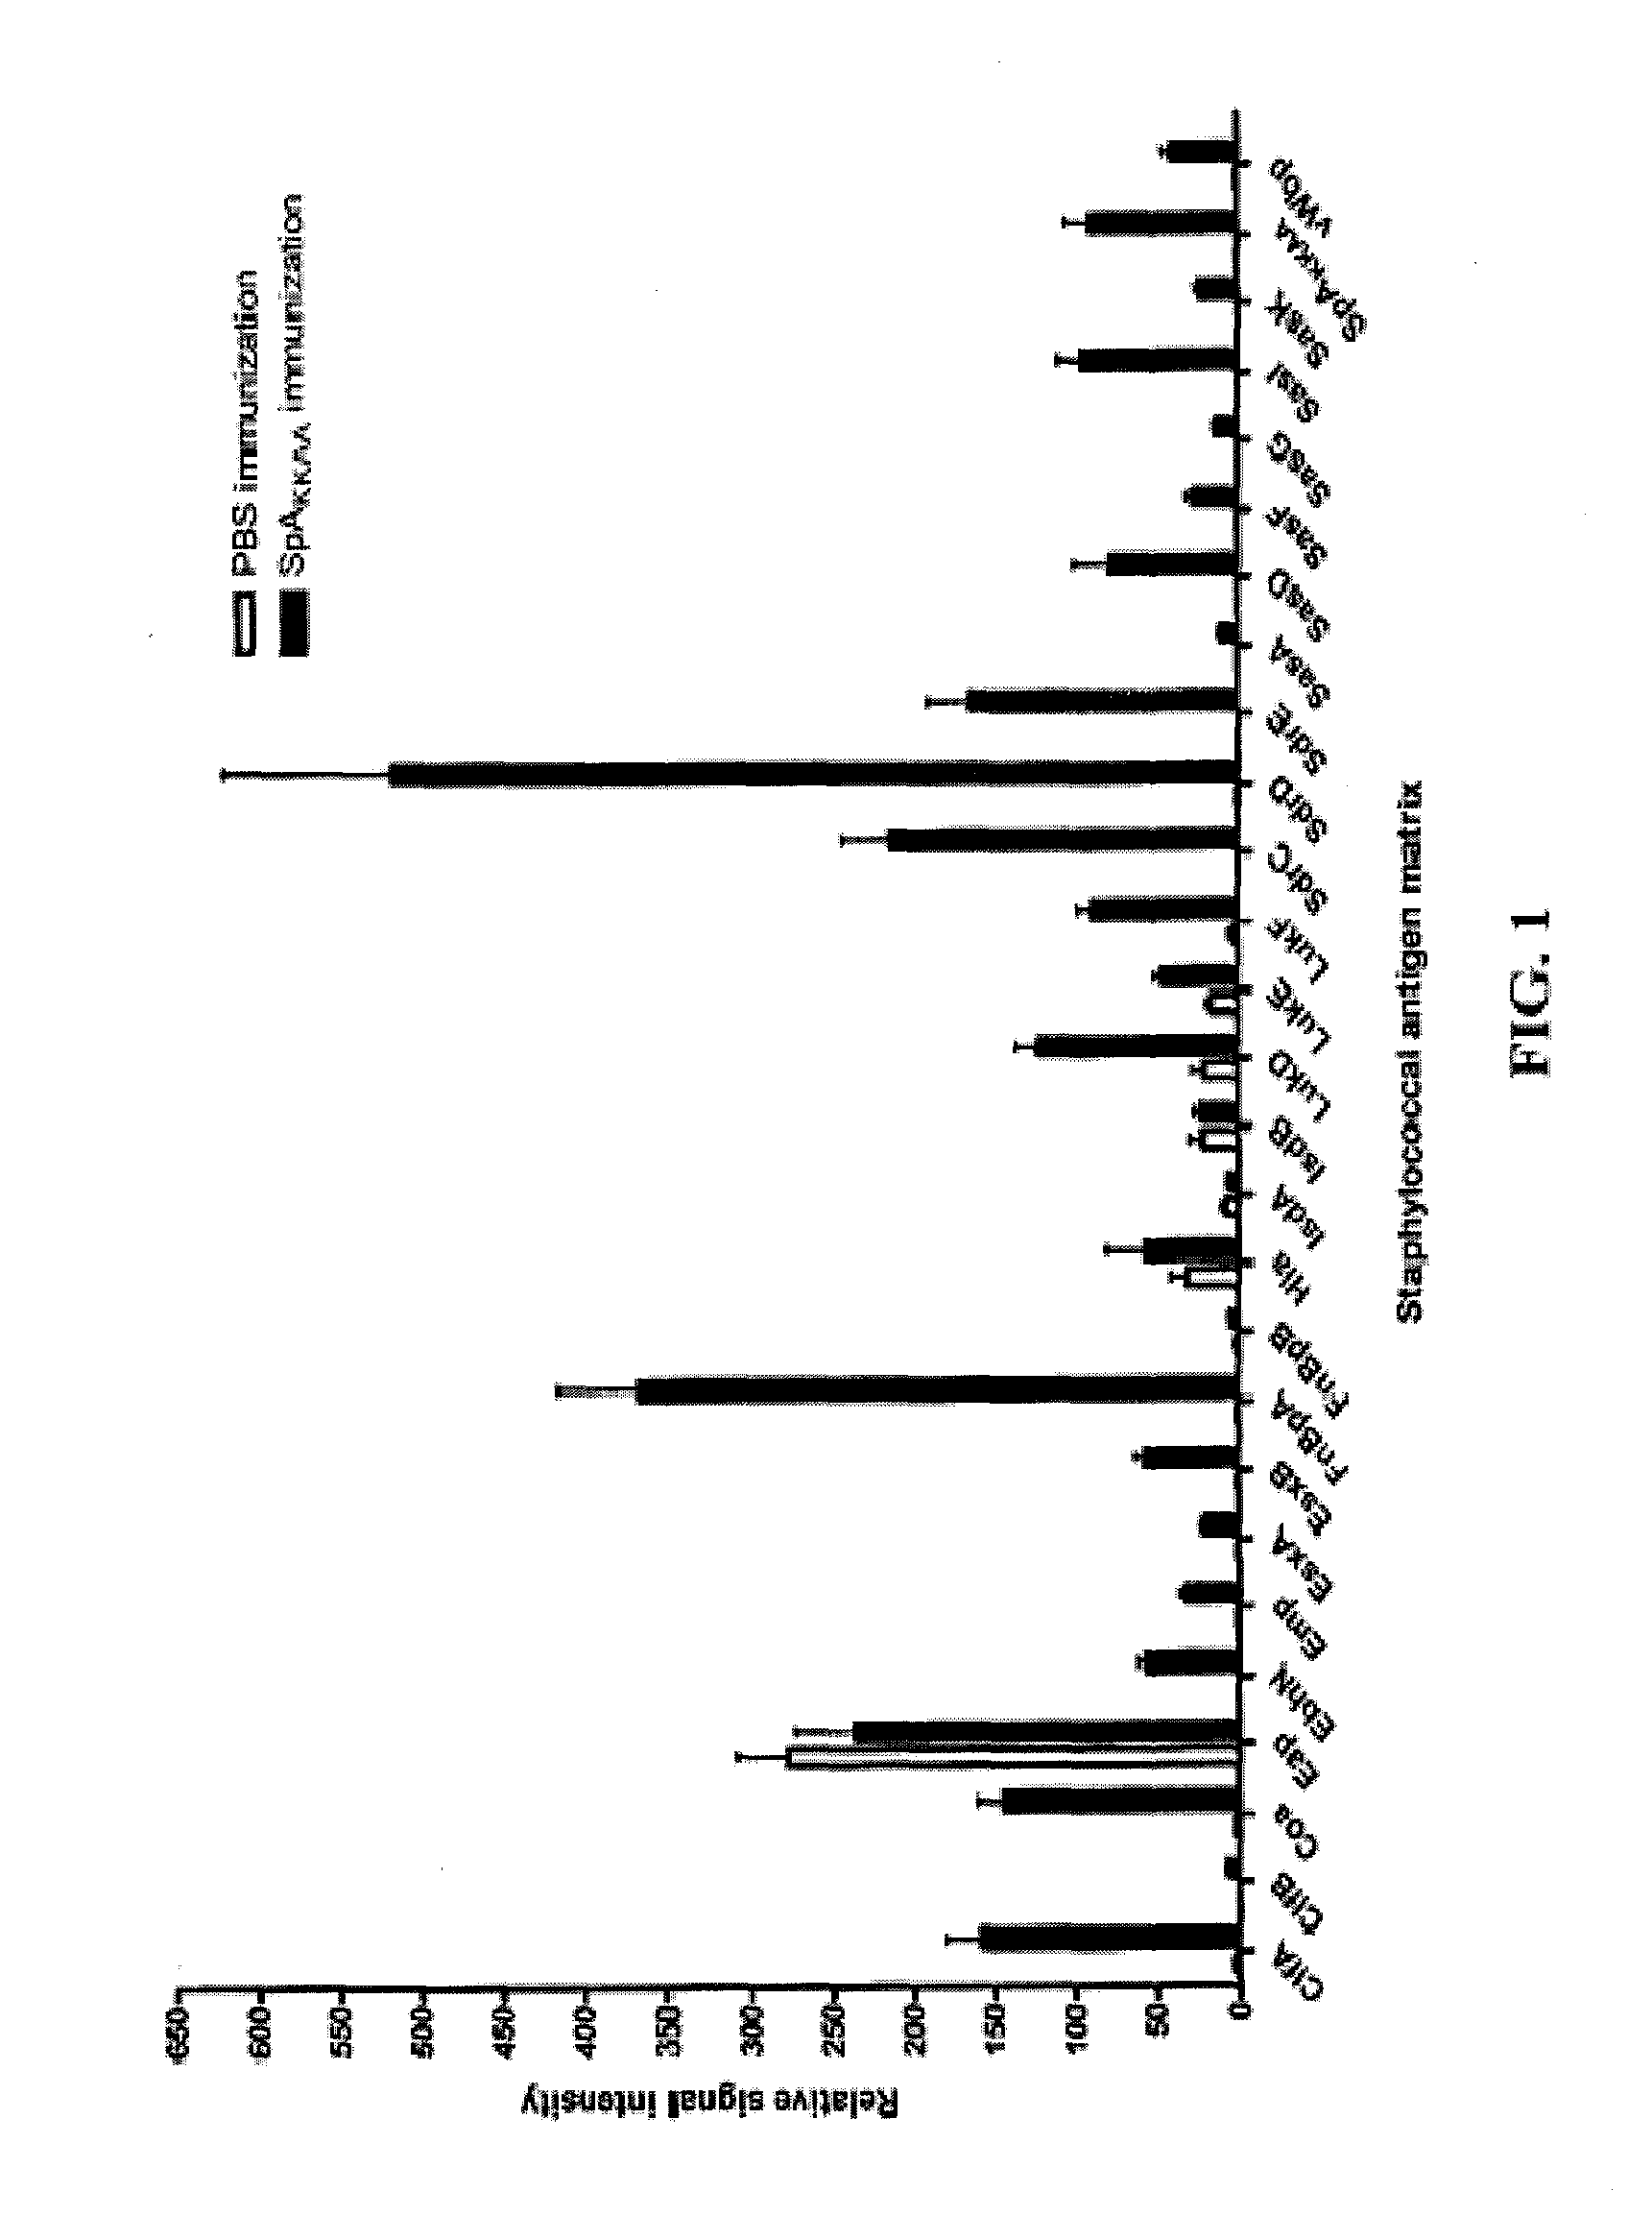 COMPOSITIONS AND METHODS RELATED TO PROTEIN A (SpA) ANTIBODIES AS AN ENHANCER OF IMMUNE RESPONSE